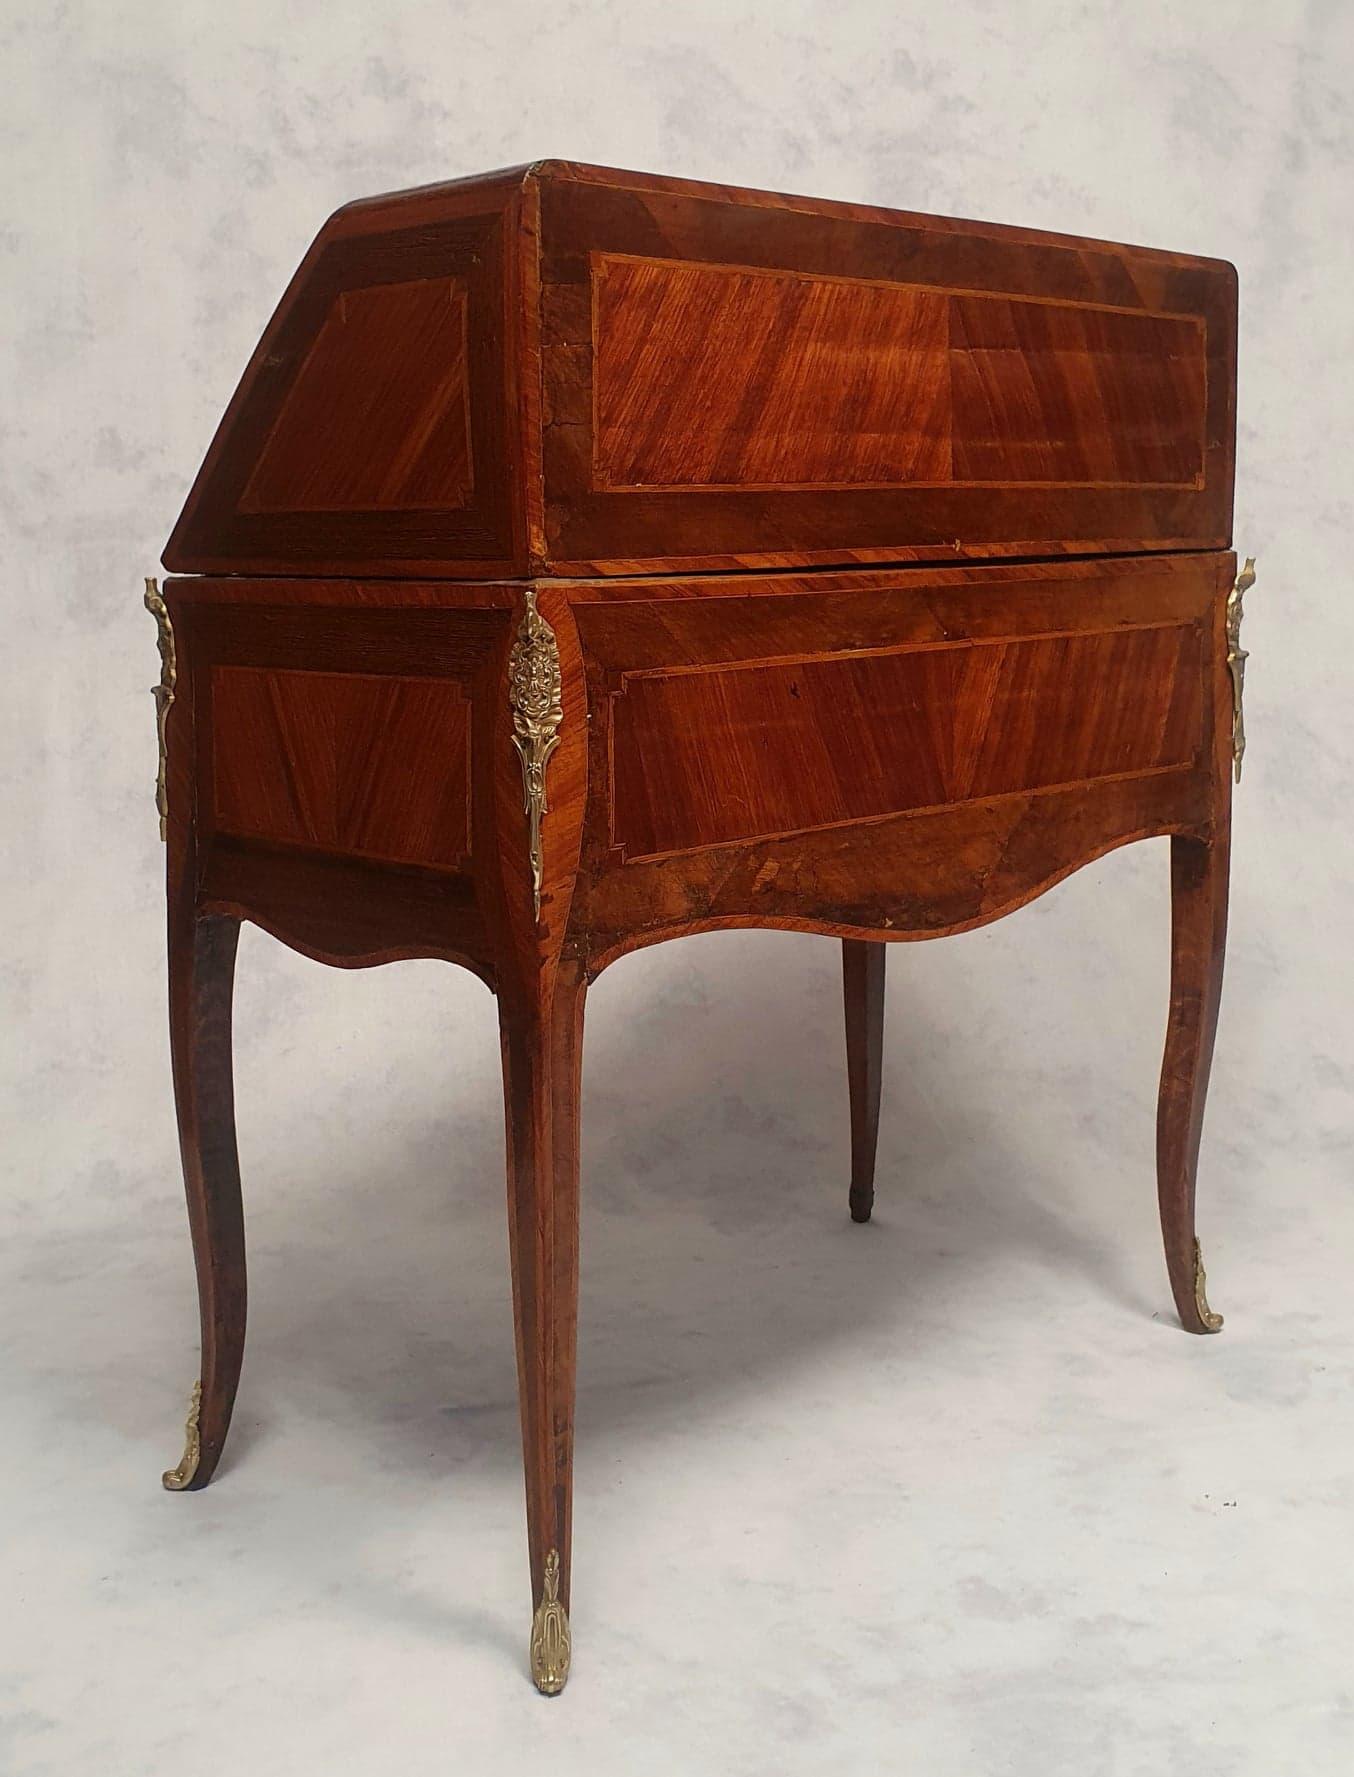 Secretary Period Transition Louis XV, Louis XVI, Palissander & Rosewood, 18th For Sale 6